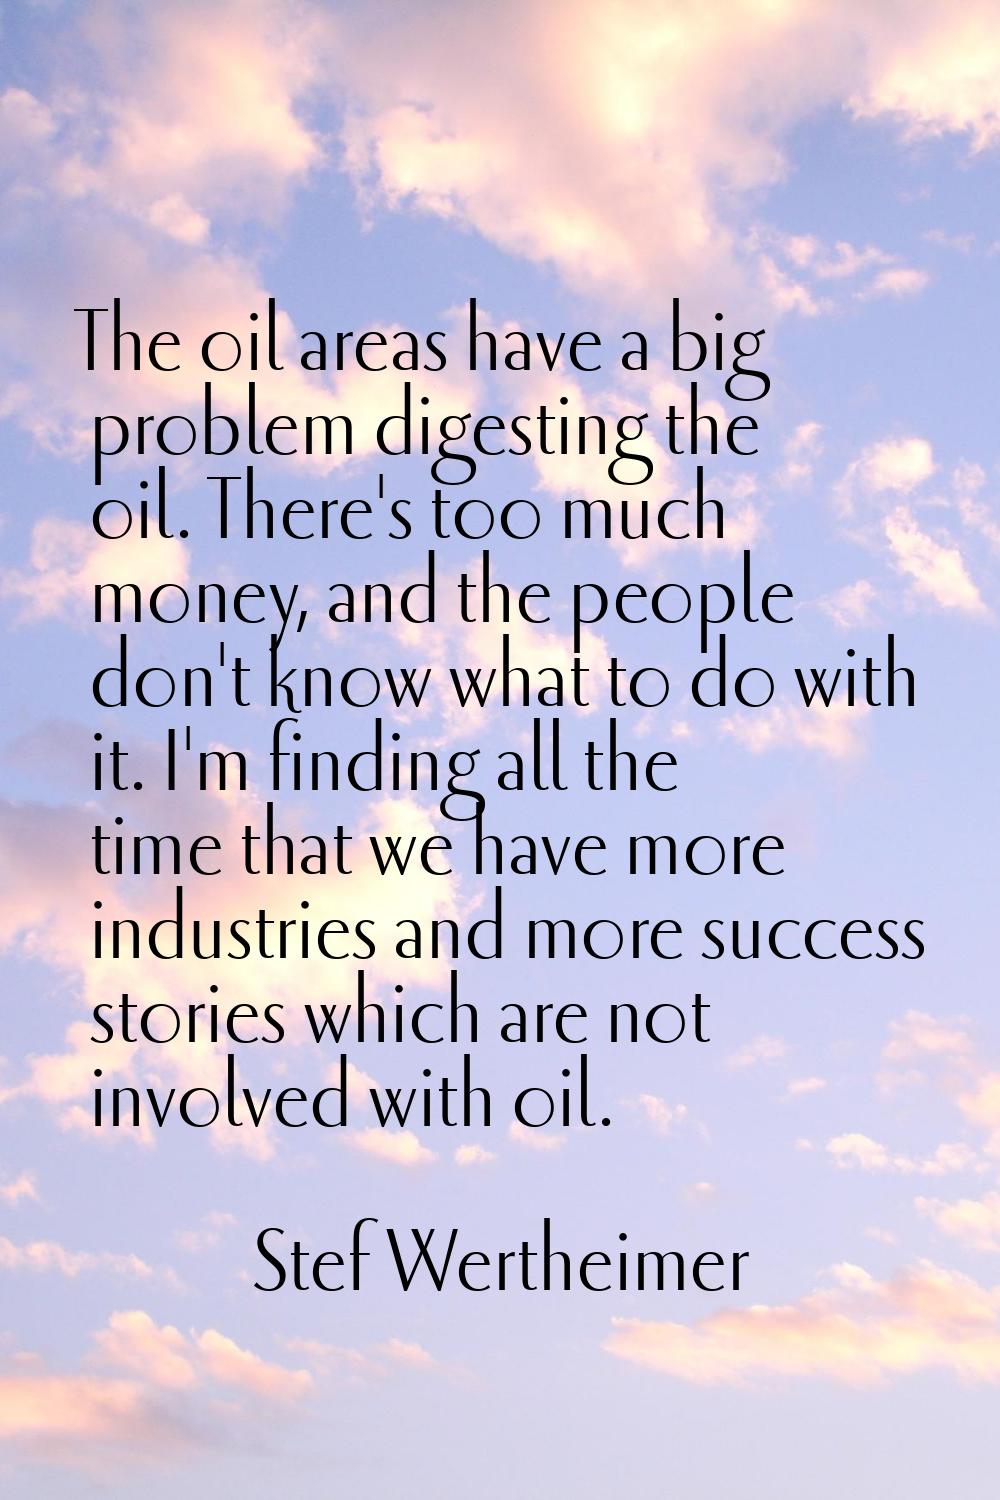 The oil areas have a big problem digesting the oil. There's too much money, and the people don't kn